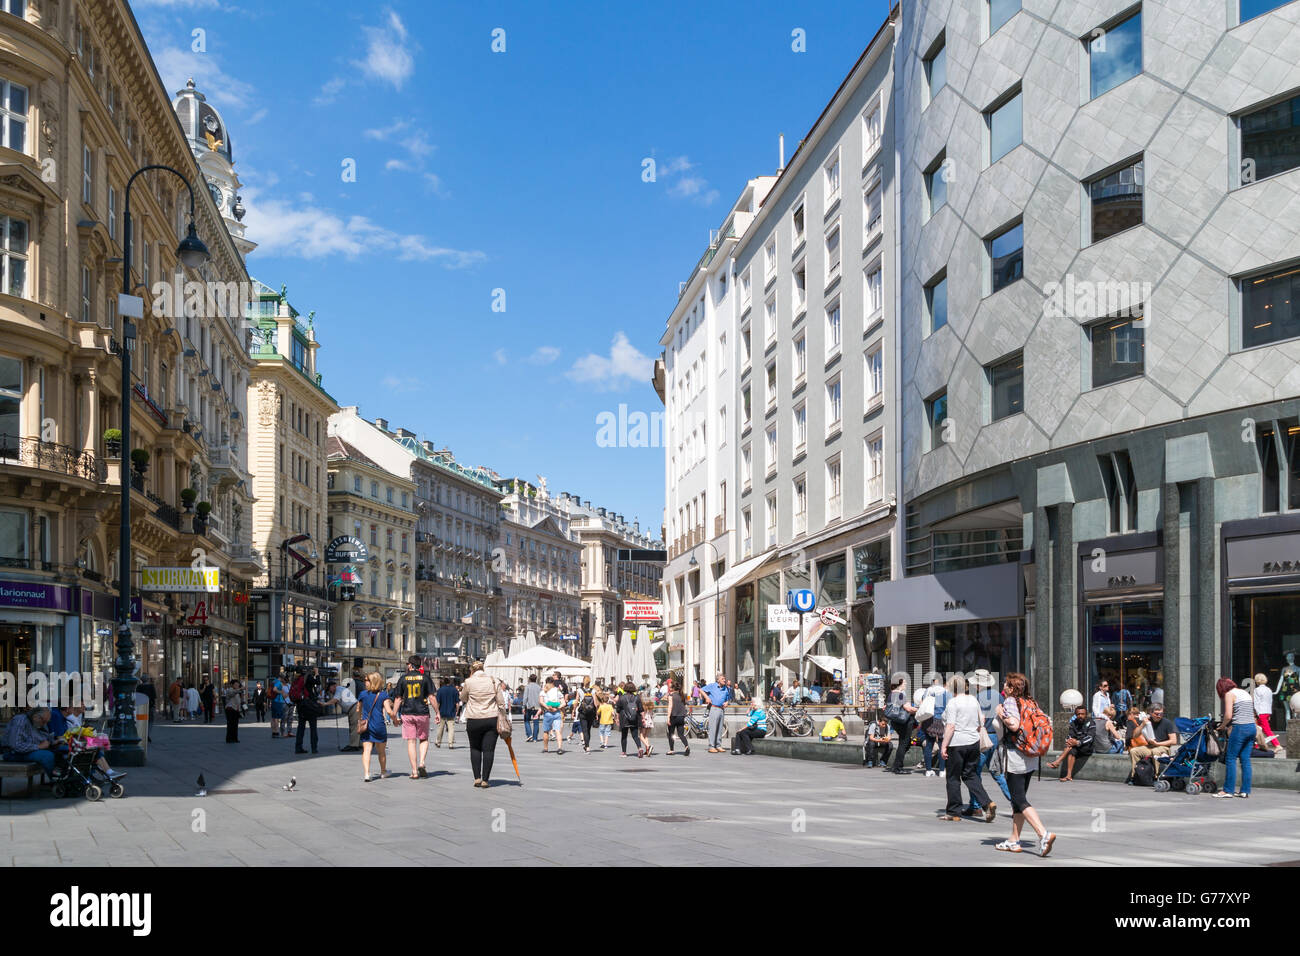 People walking in shopping street Graben in the old city centre of Vienna, Austria Stock Photo